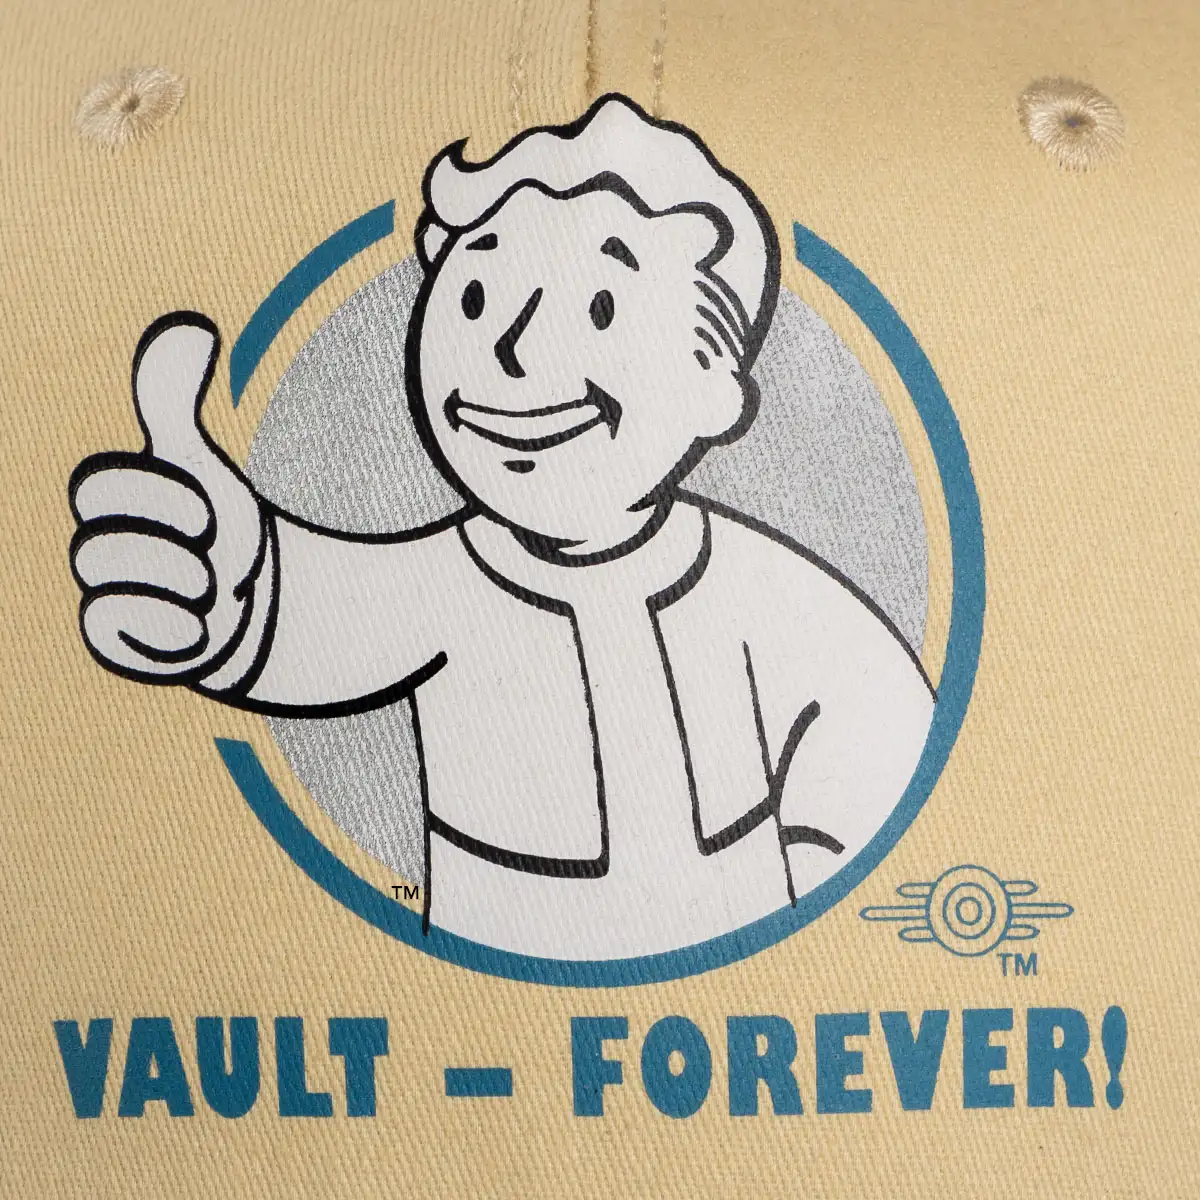 Fallout Snapback Cap "Vault Forever" Image 2